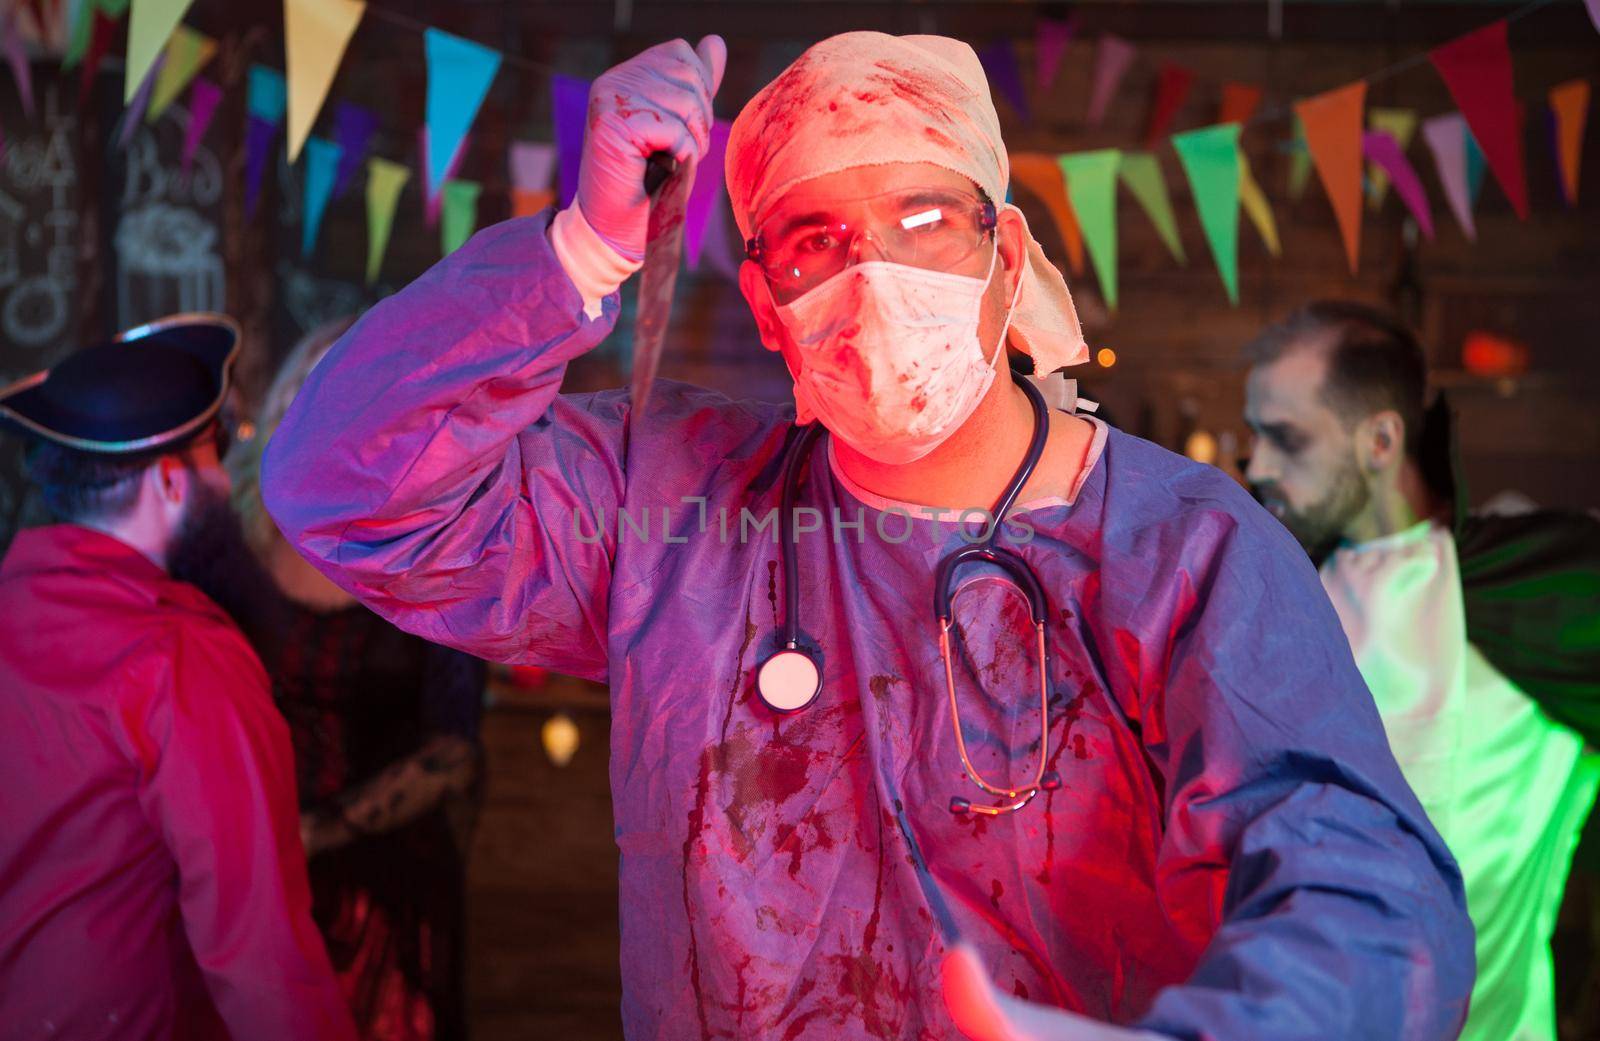 Portrait of spooky doctor with a knife on his hand looking into the camera at a halloween celebration. Man in dracula costume in the background.